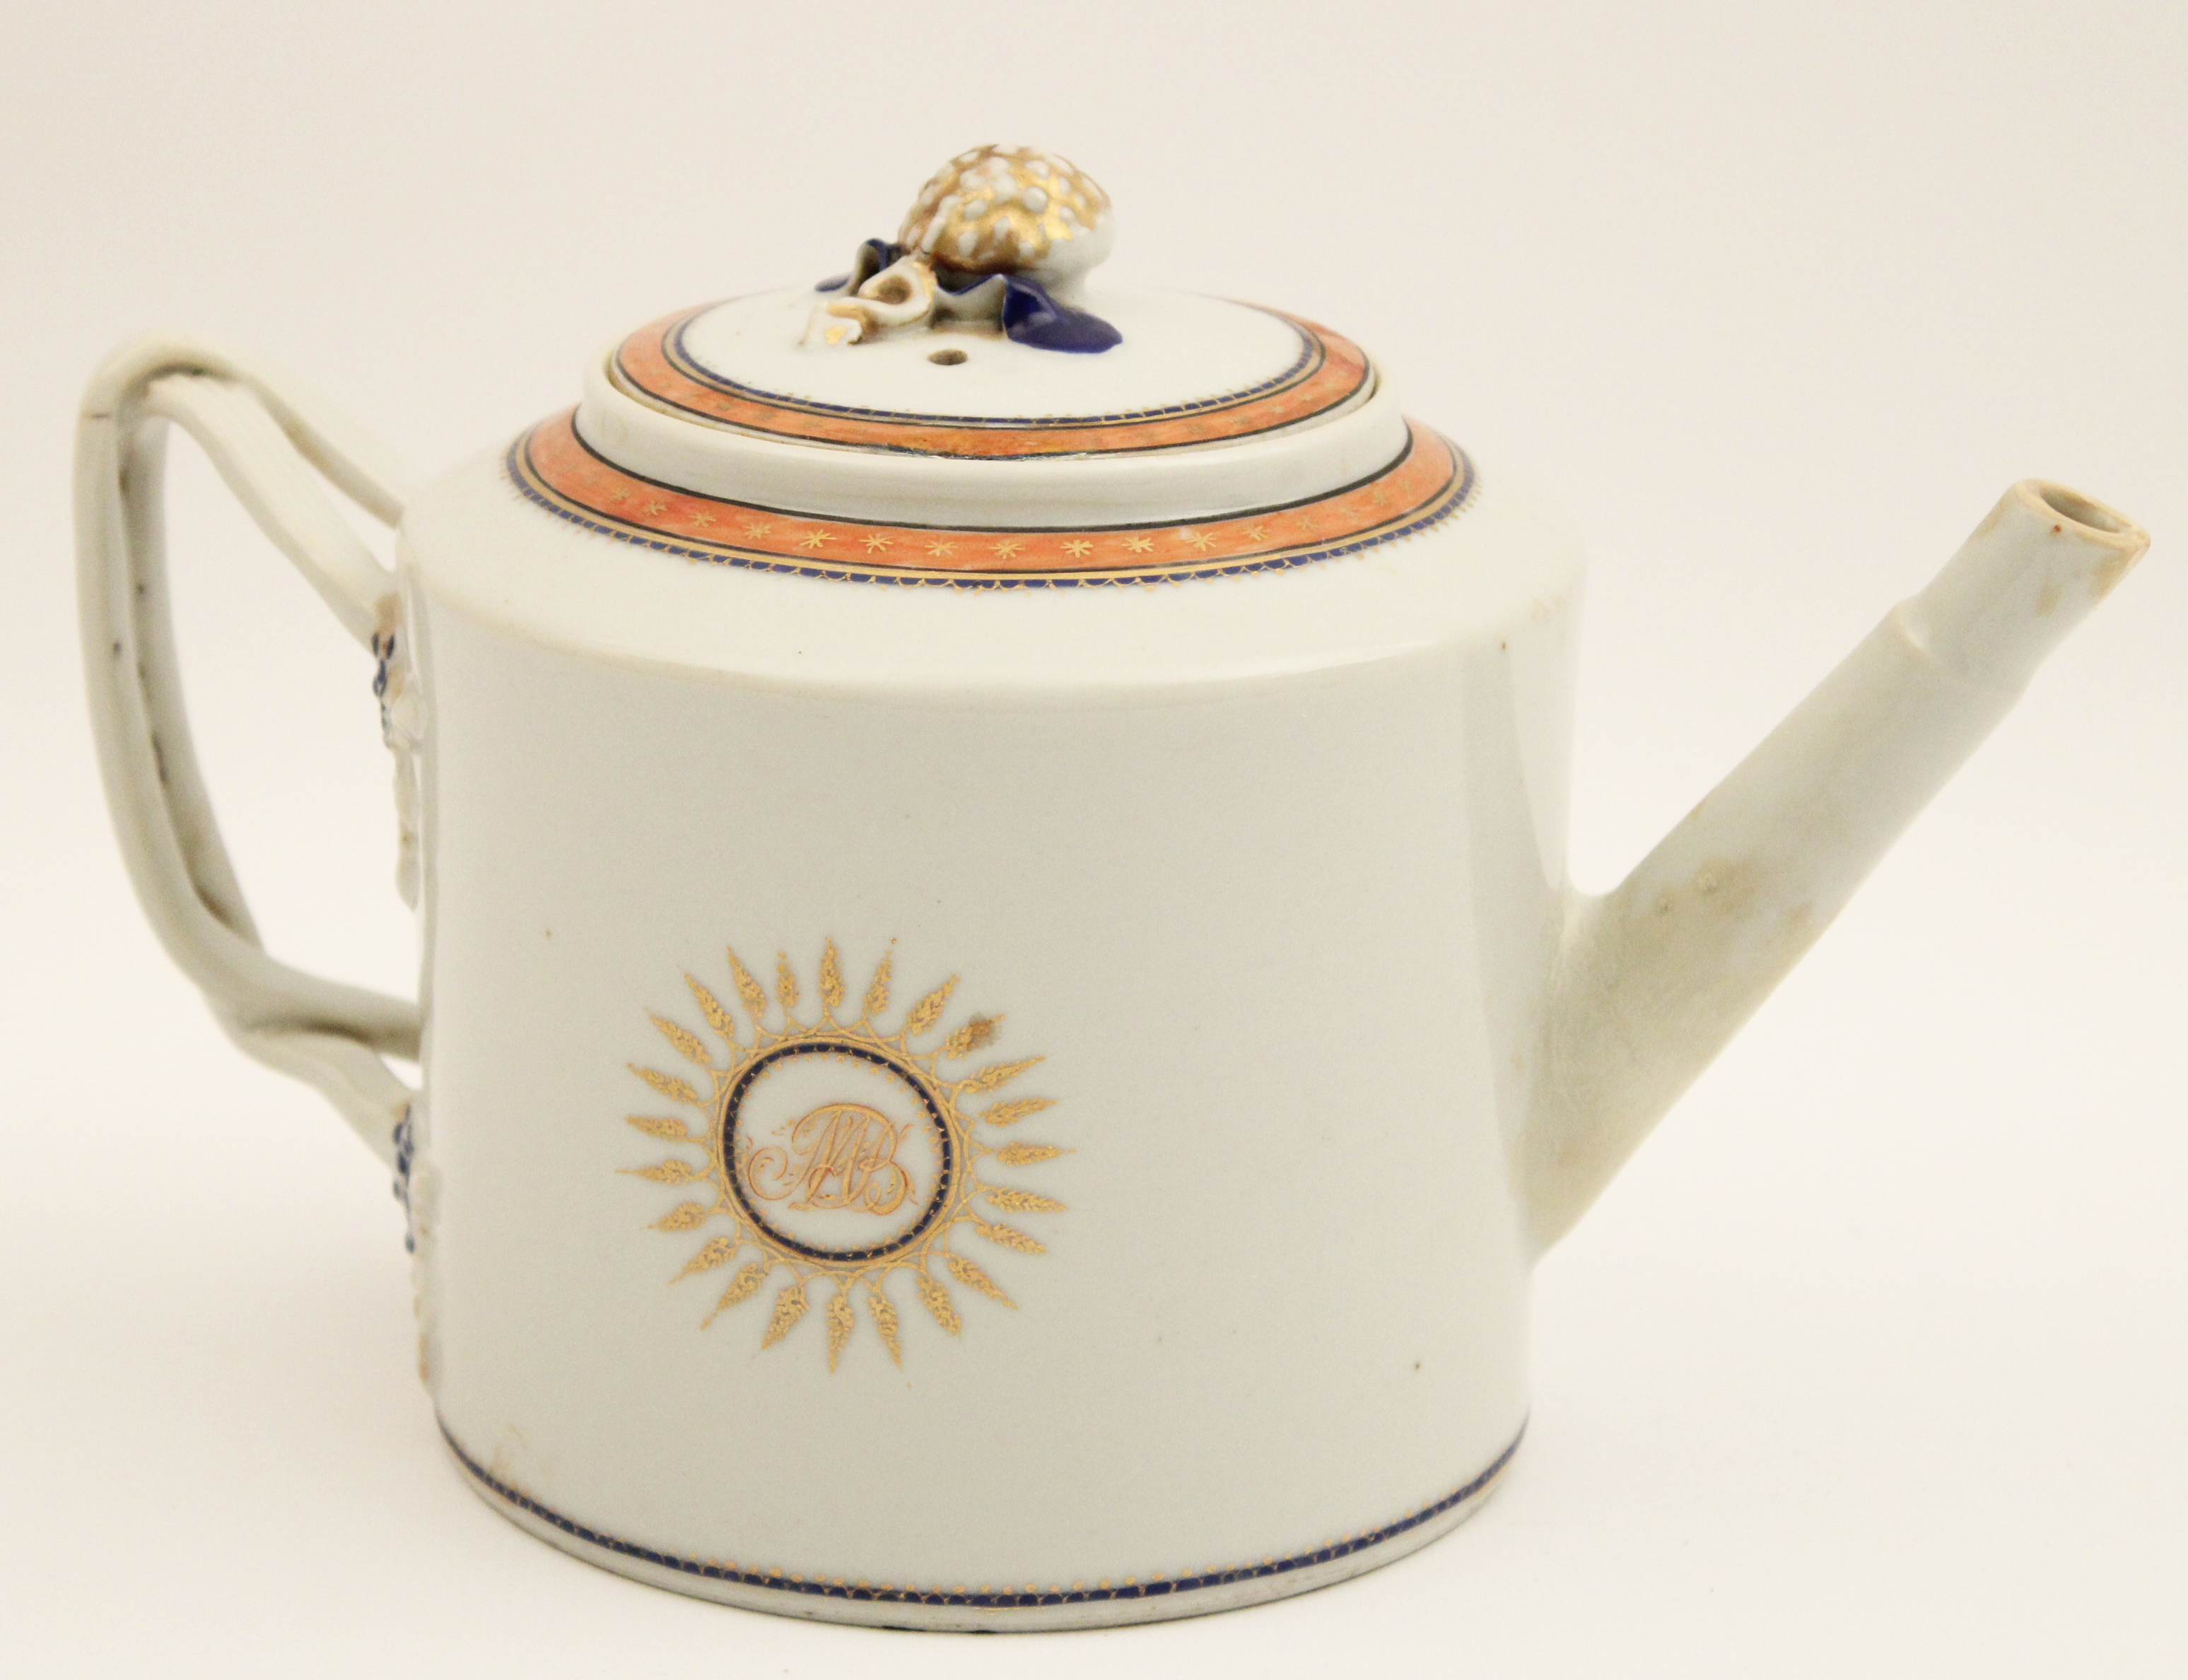 EARLY CHINESE EXPORT COVER TEAPOT